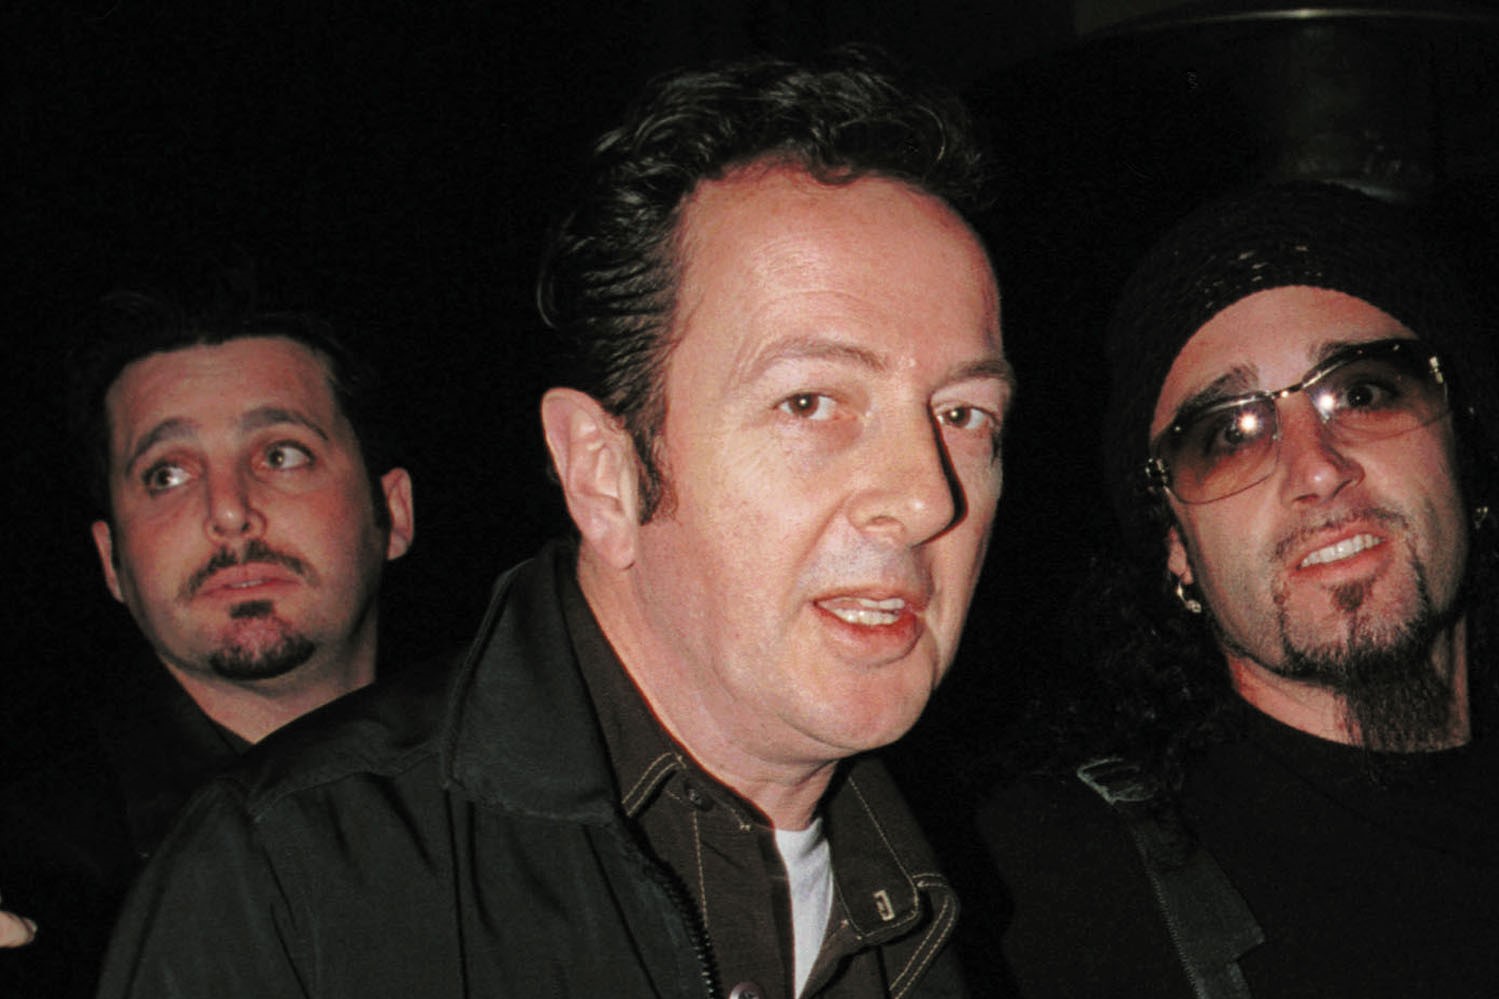 Remembering Joe Strummer: Clash Band Member's Cause of Death Revisited After 20 Years